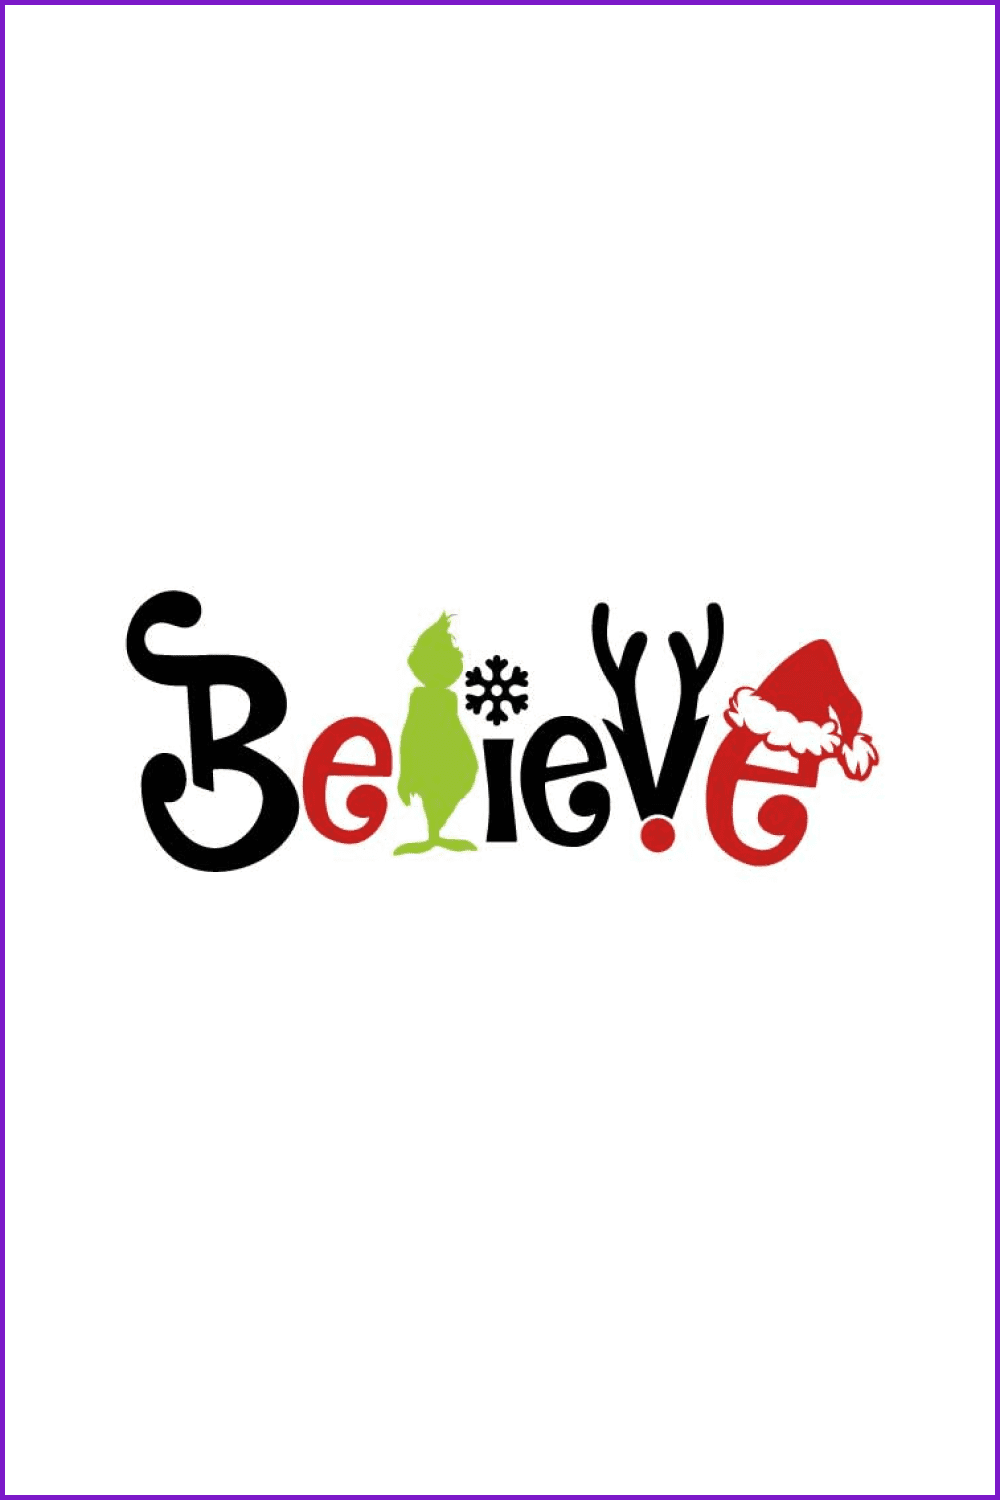 Grinch believe SVG & PNG Christmas files.